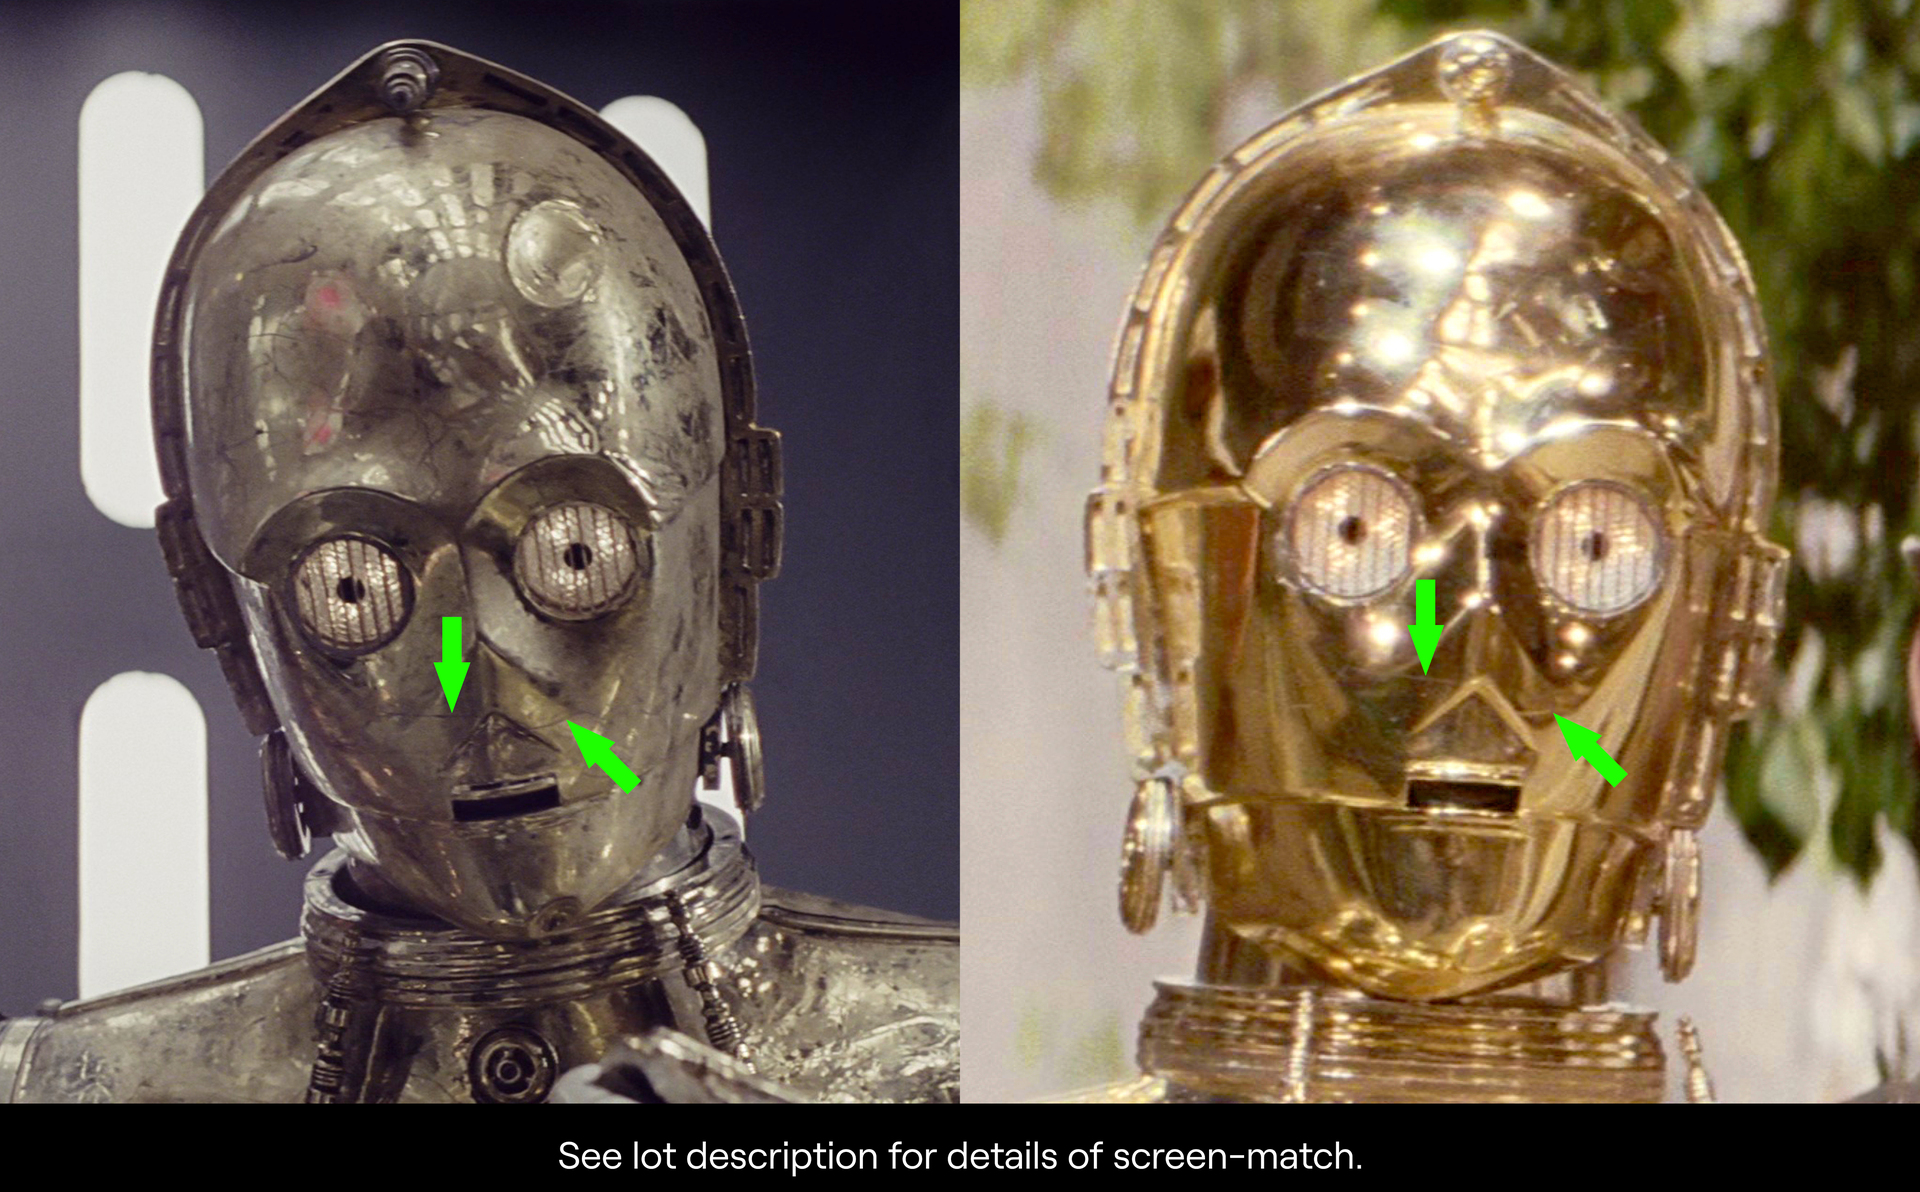 STAR WARS: A NEW HOPE (1977) - Anthony Daniels Collection: Screen-matched Light-up C-3PO (Anthony Da - Image 42 of 42